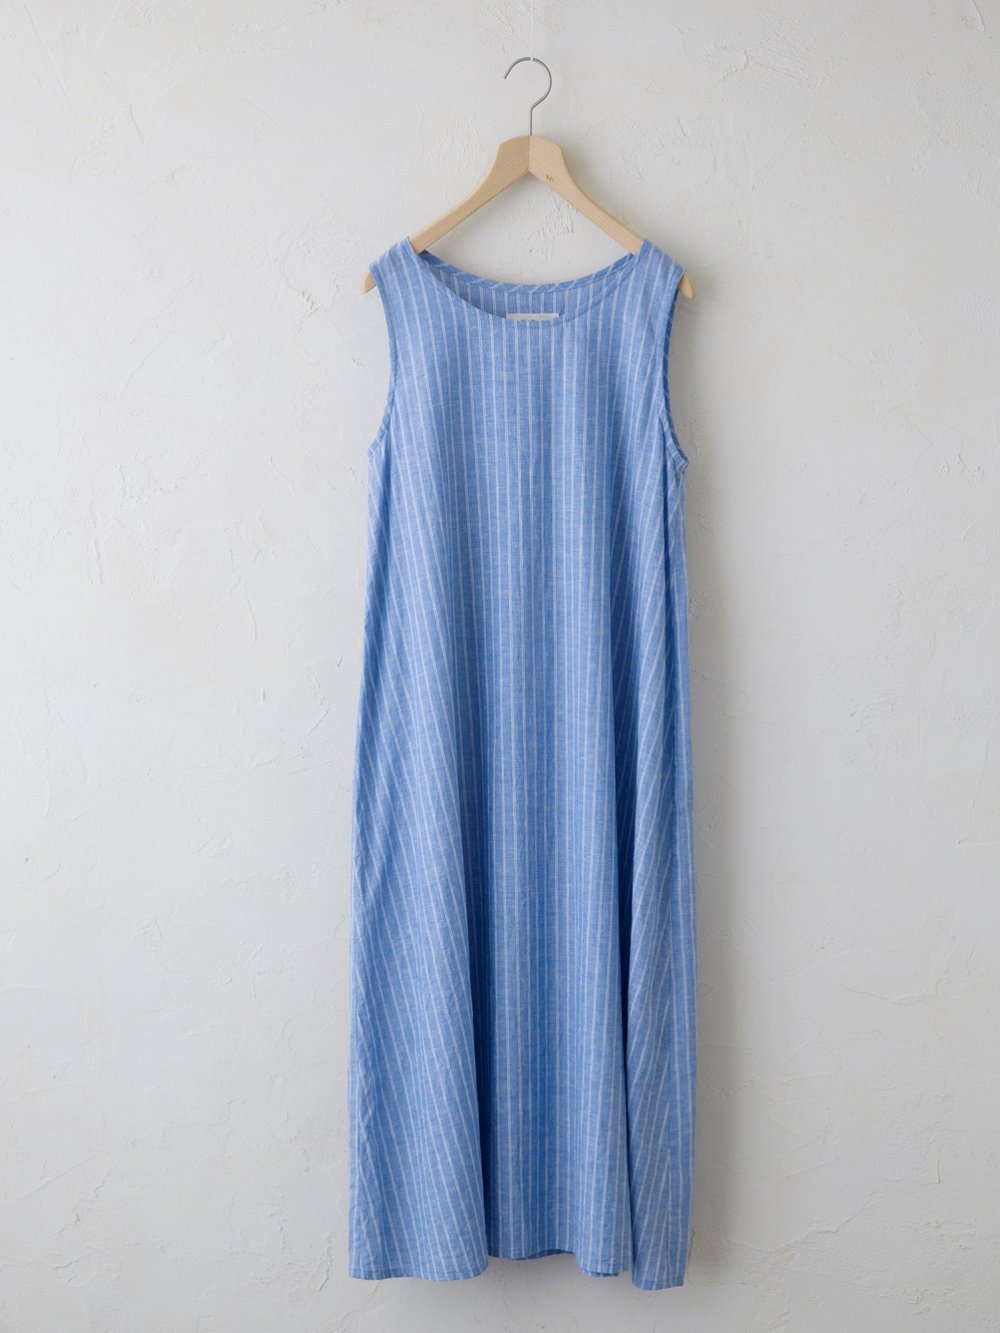 【ARCHIVES】 Cotton Linen Stripe レイヤードワンピース